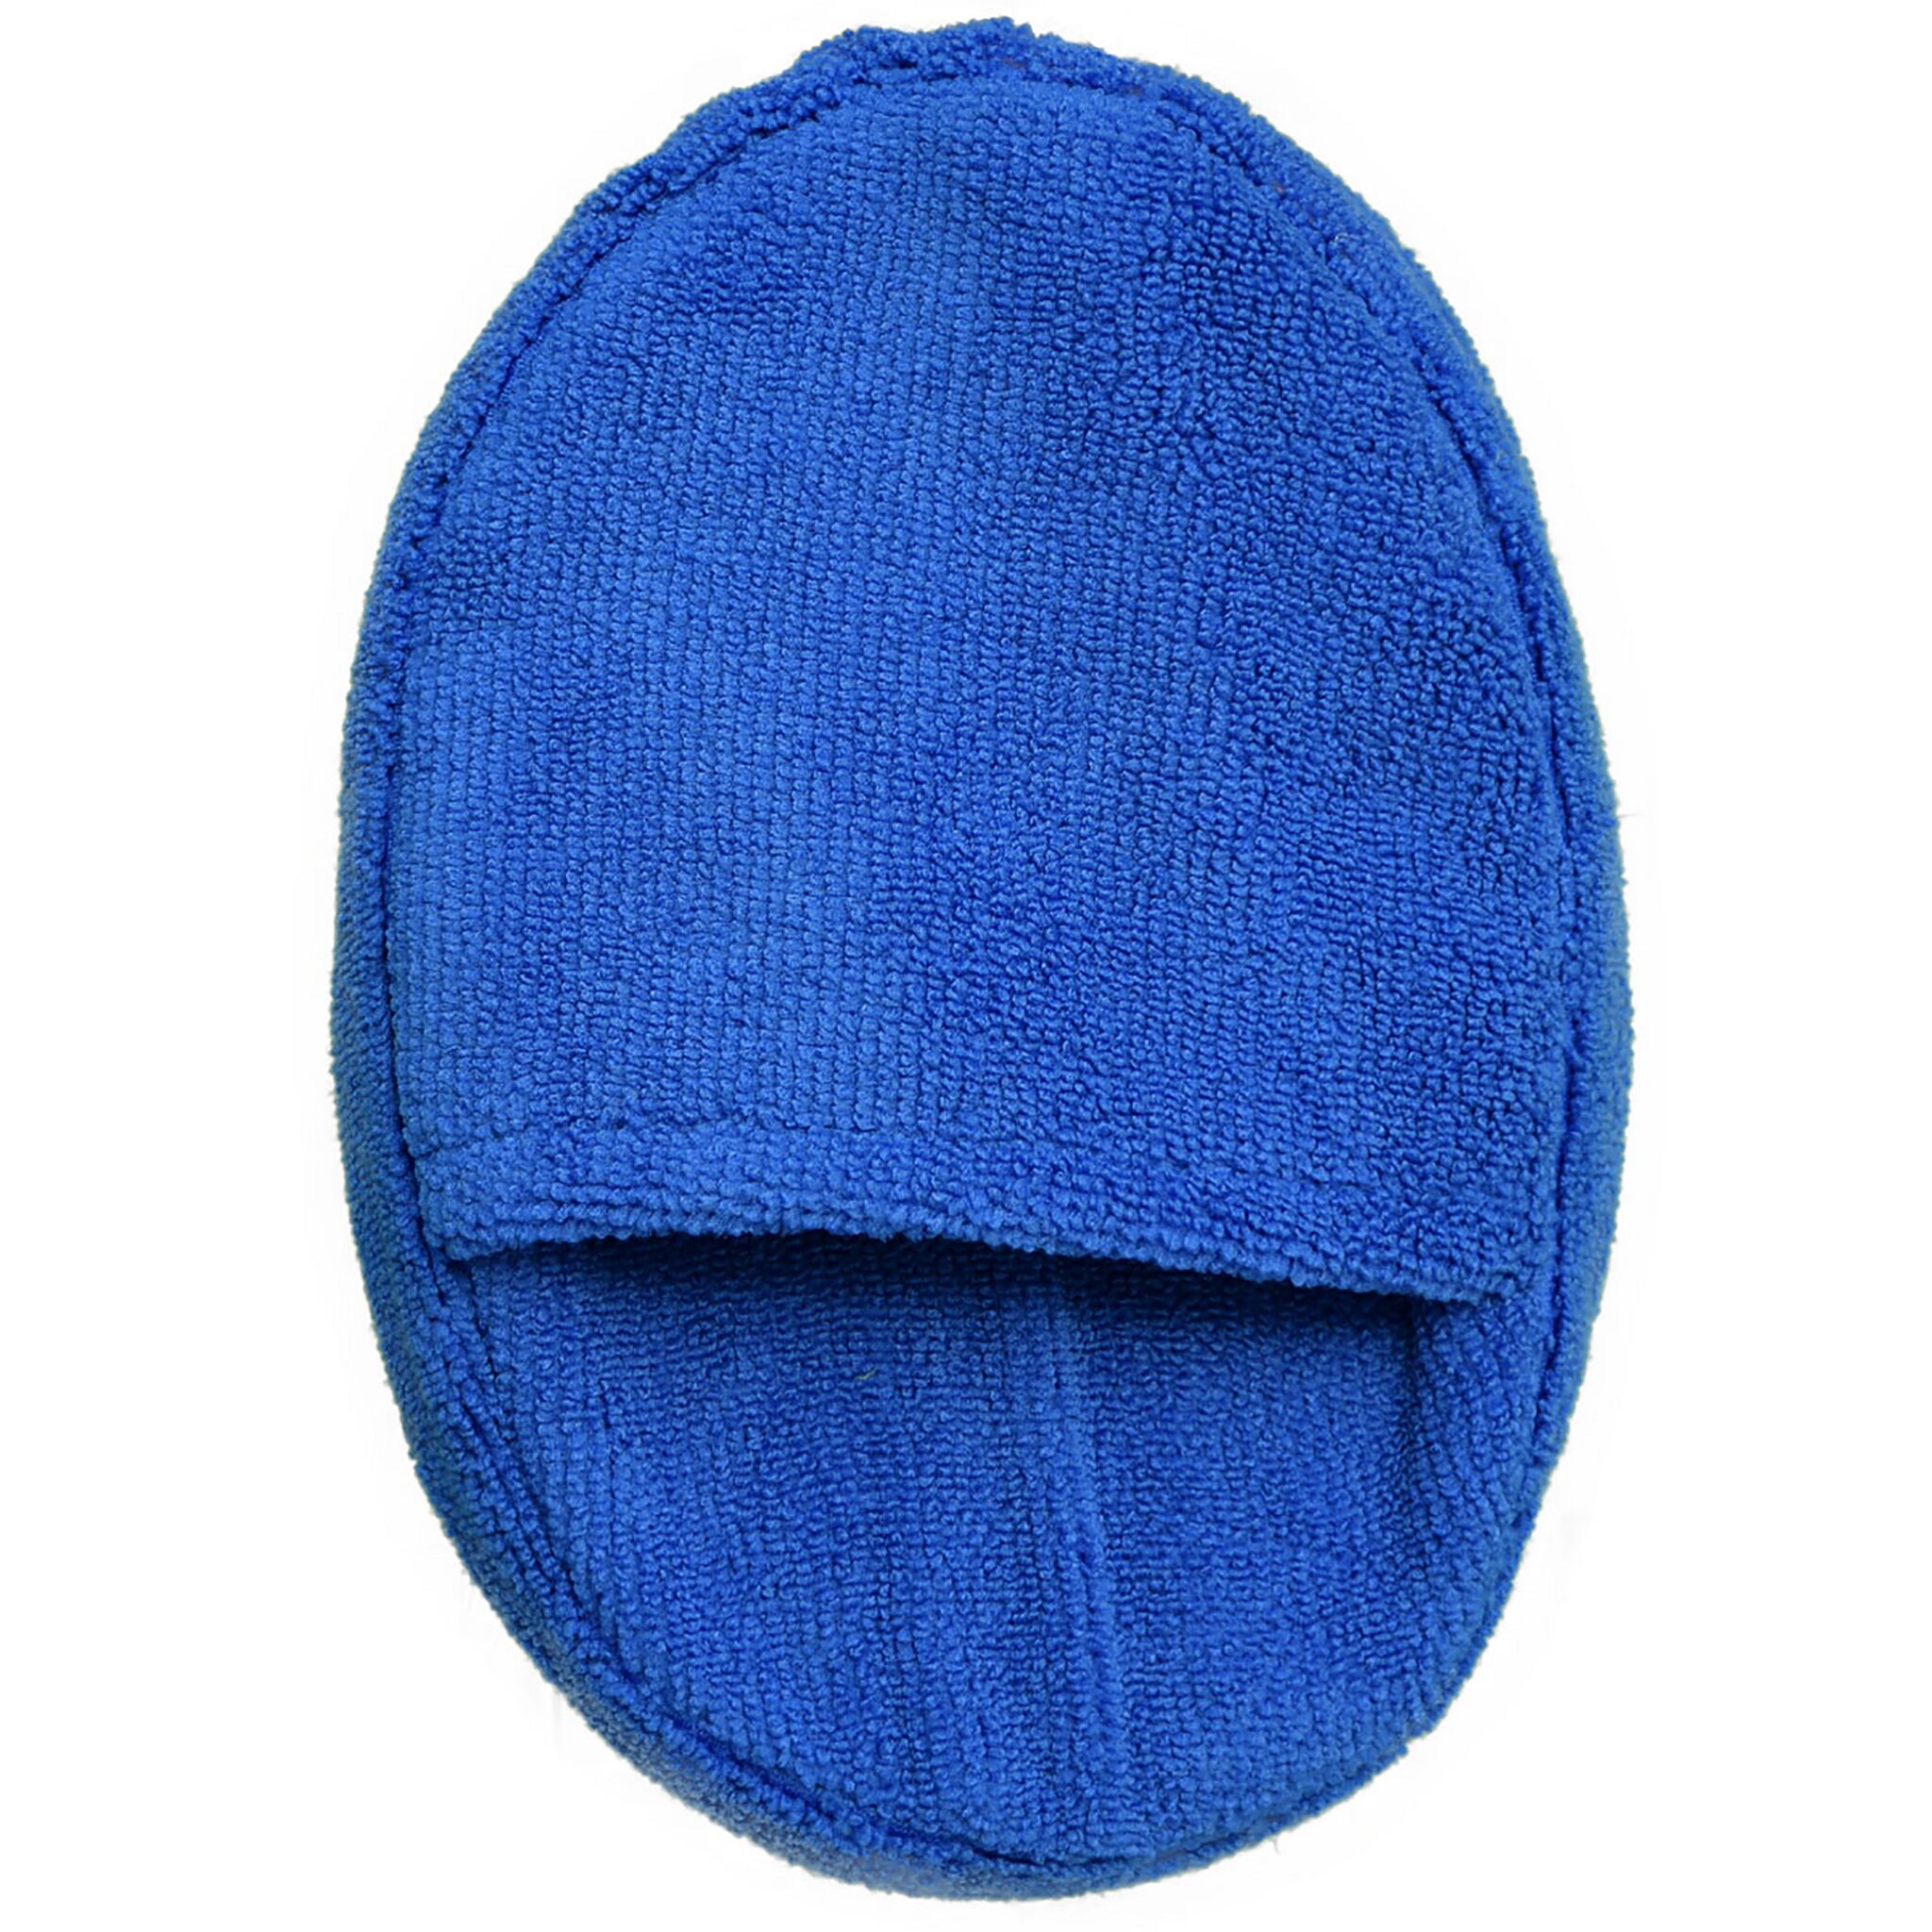 Hand wash pad in blue